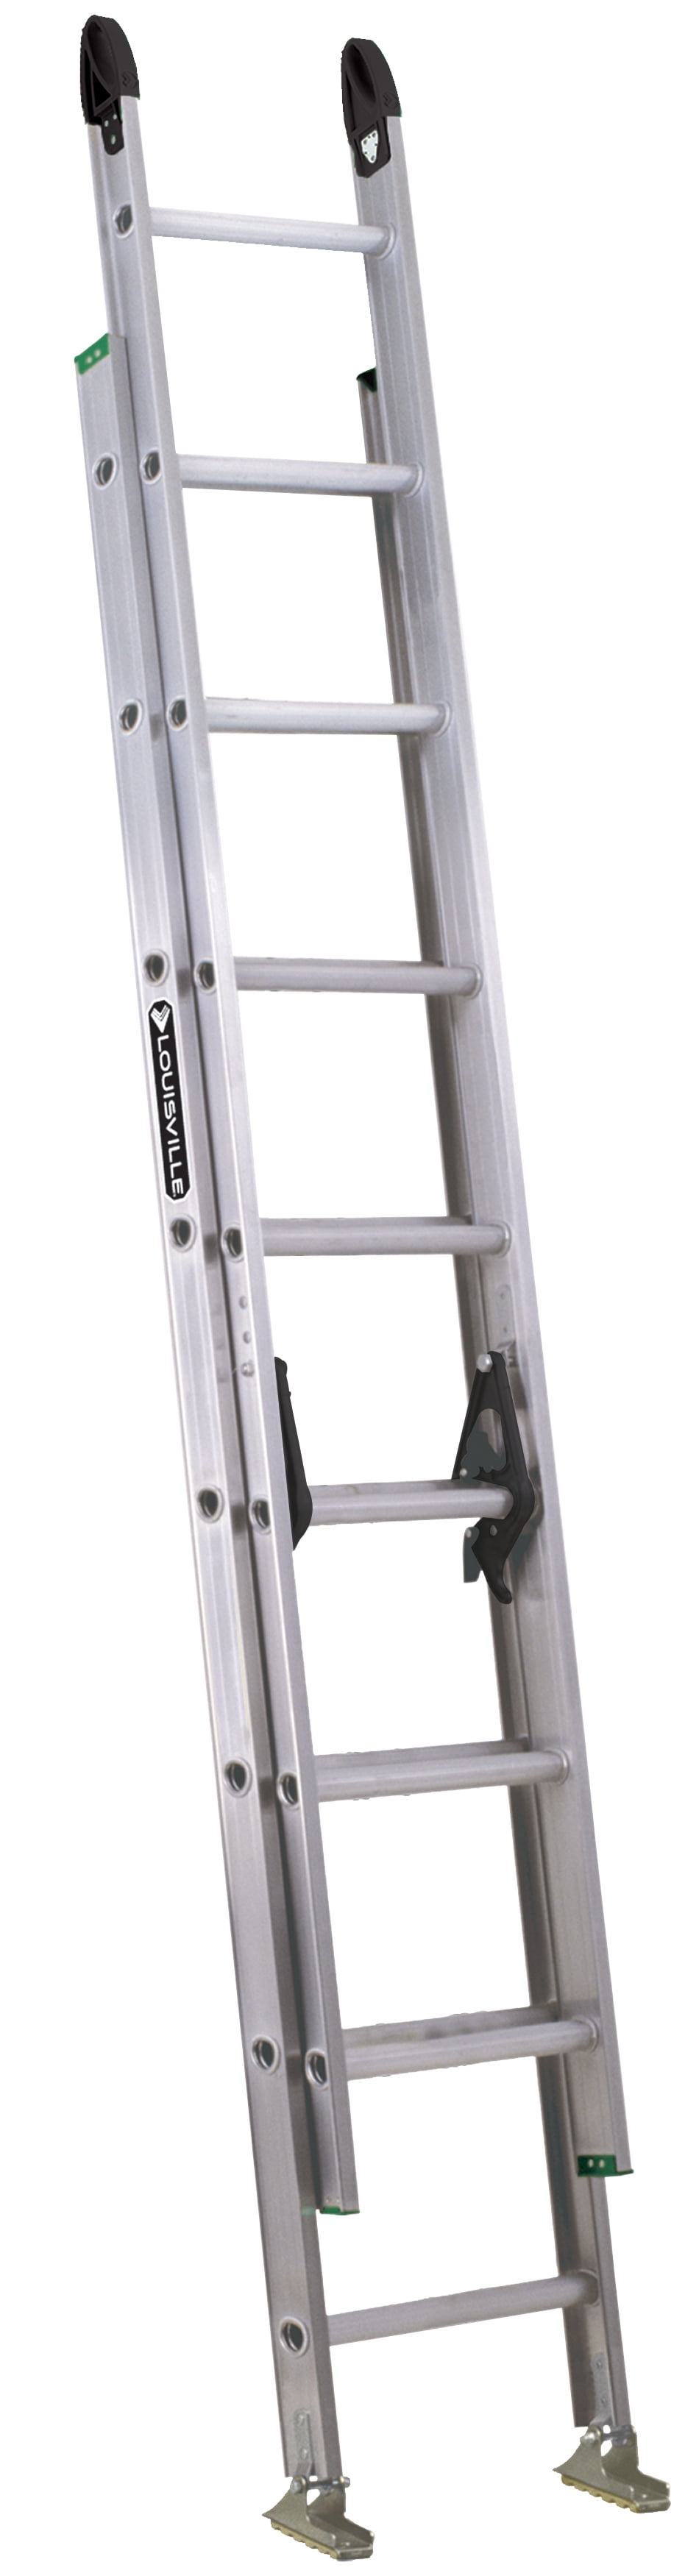 Louisville Ladder 16 Aluminum Extension, 15' Reach, 225 lbs Load Capacity, W-2222-16PG